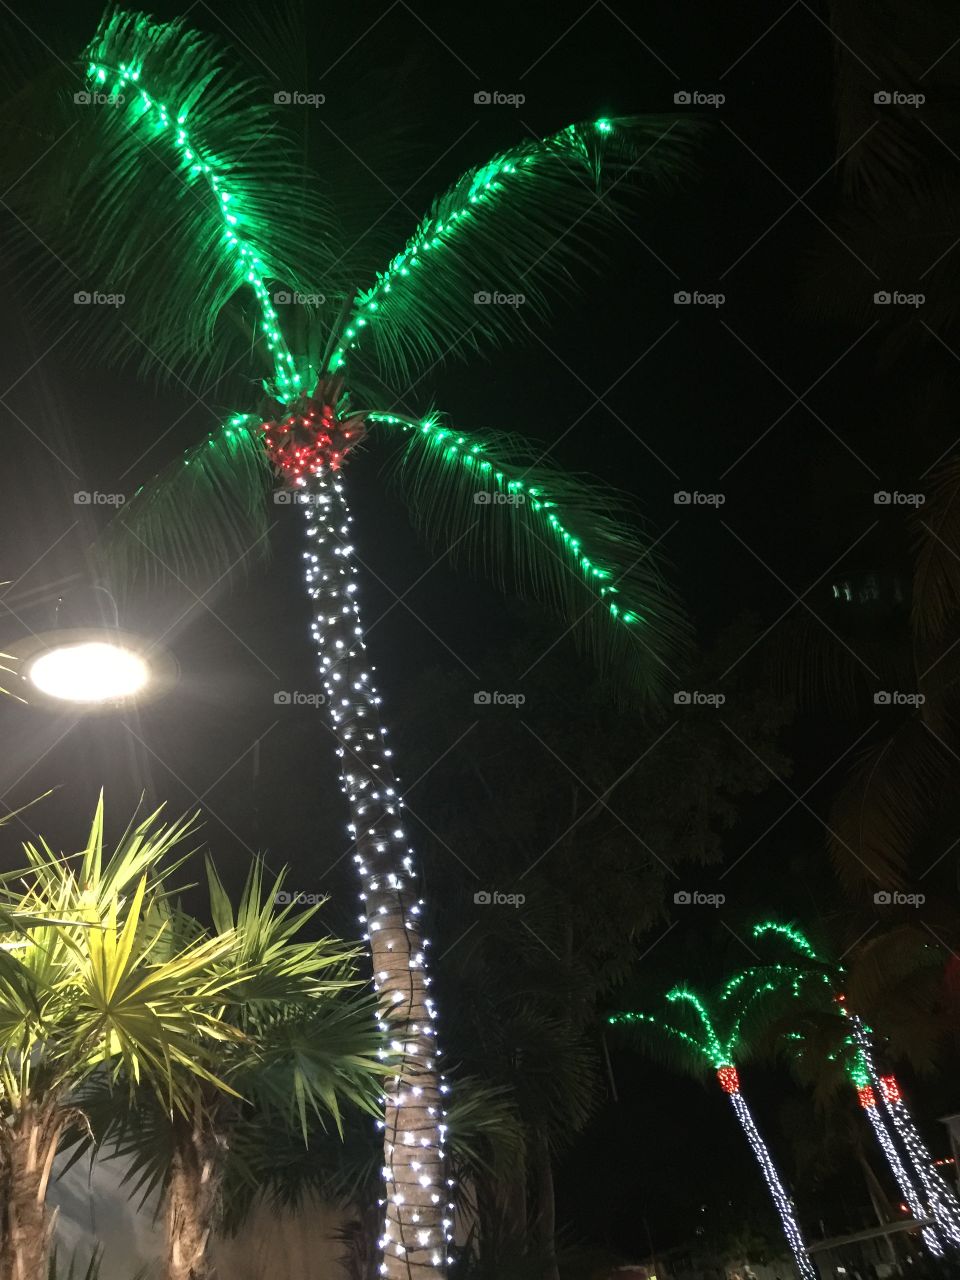 Palm tree with Christmas lights in Key West, FL